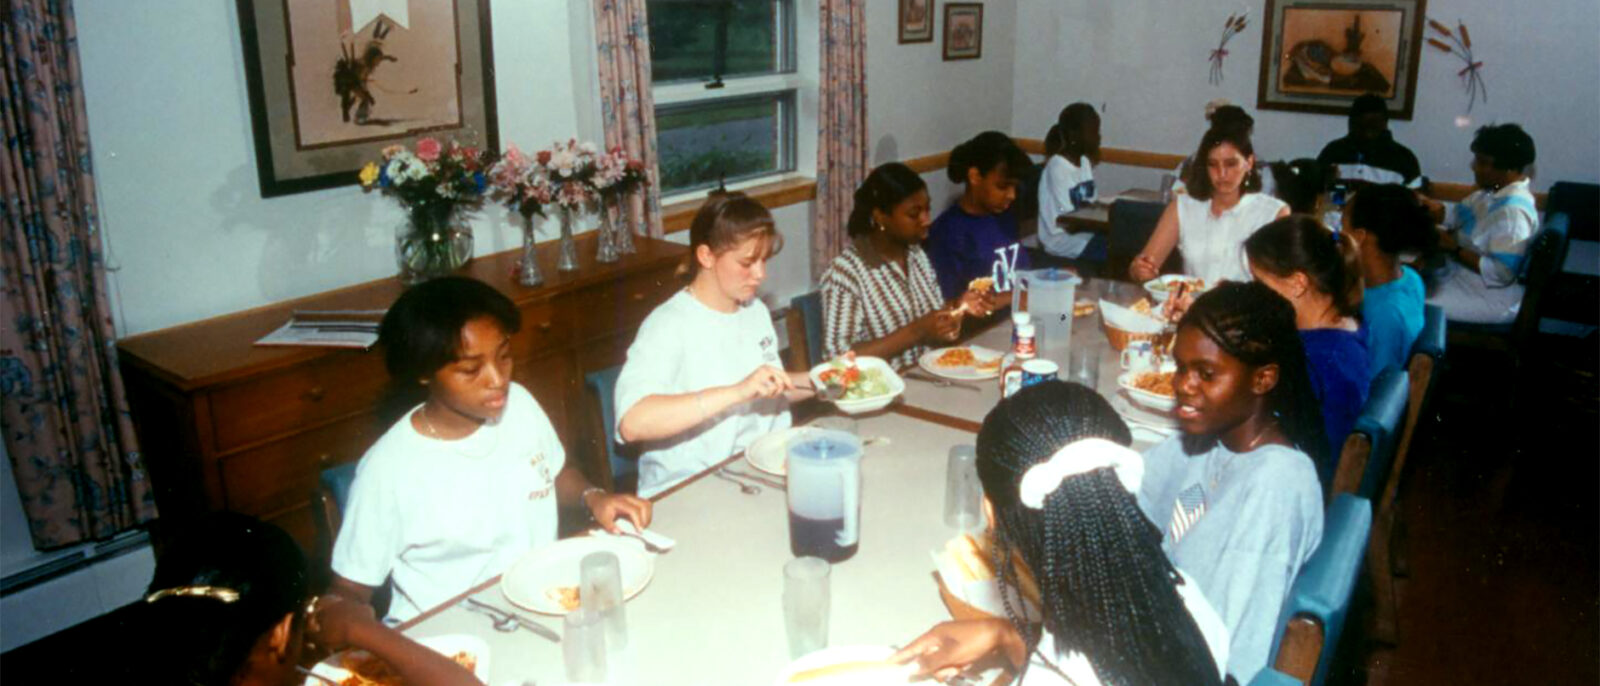 Many things have changed since the school was founded in 1909, but the students still live in a family environment with houseparents and eat together at family mealtime.